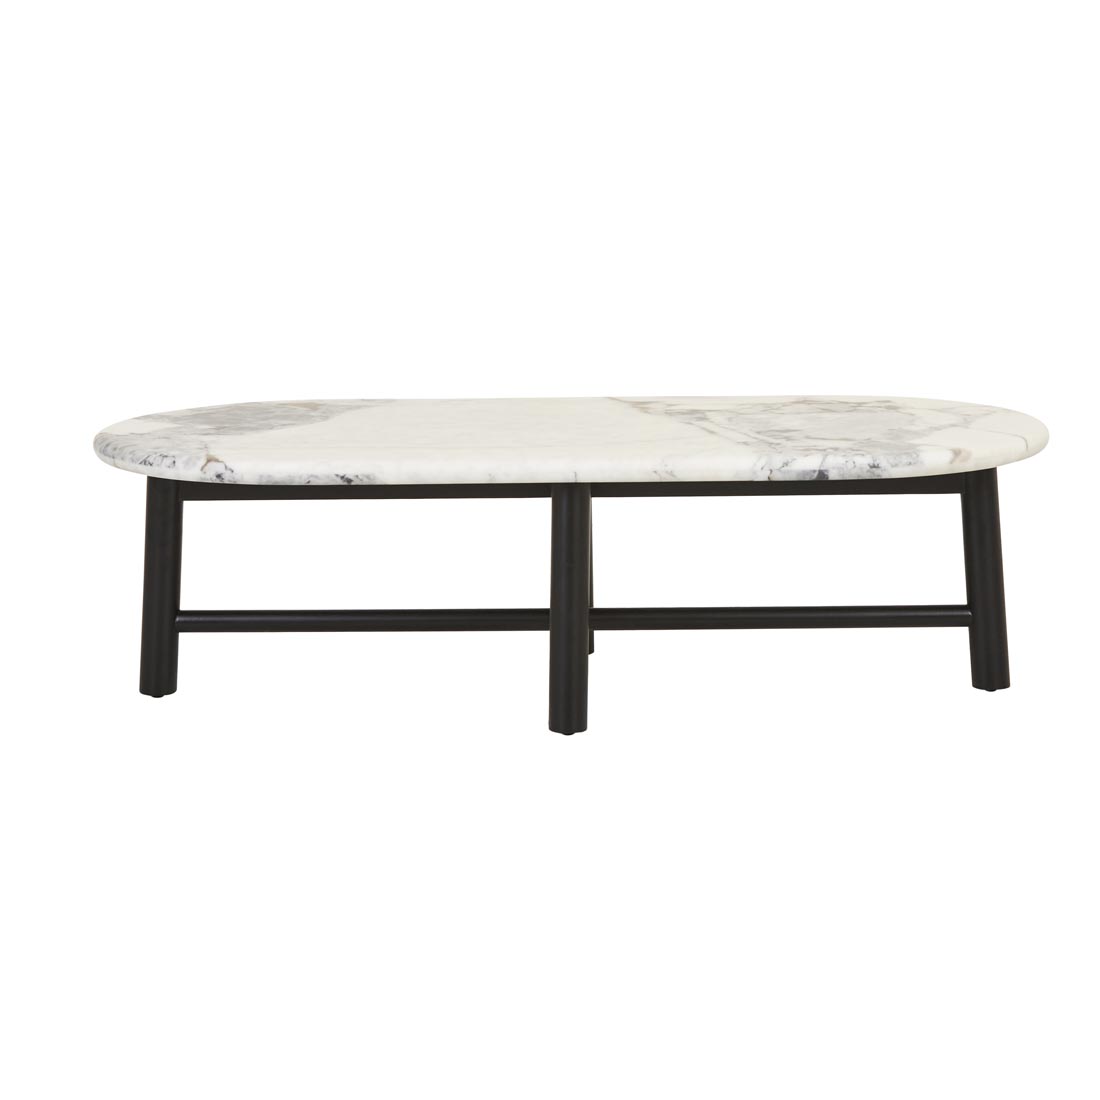 Artie Oval Marble Coffee Table image 20